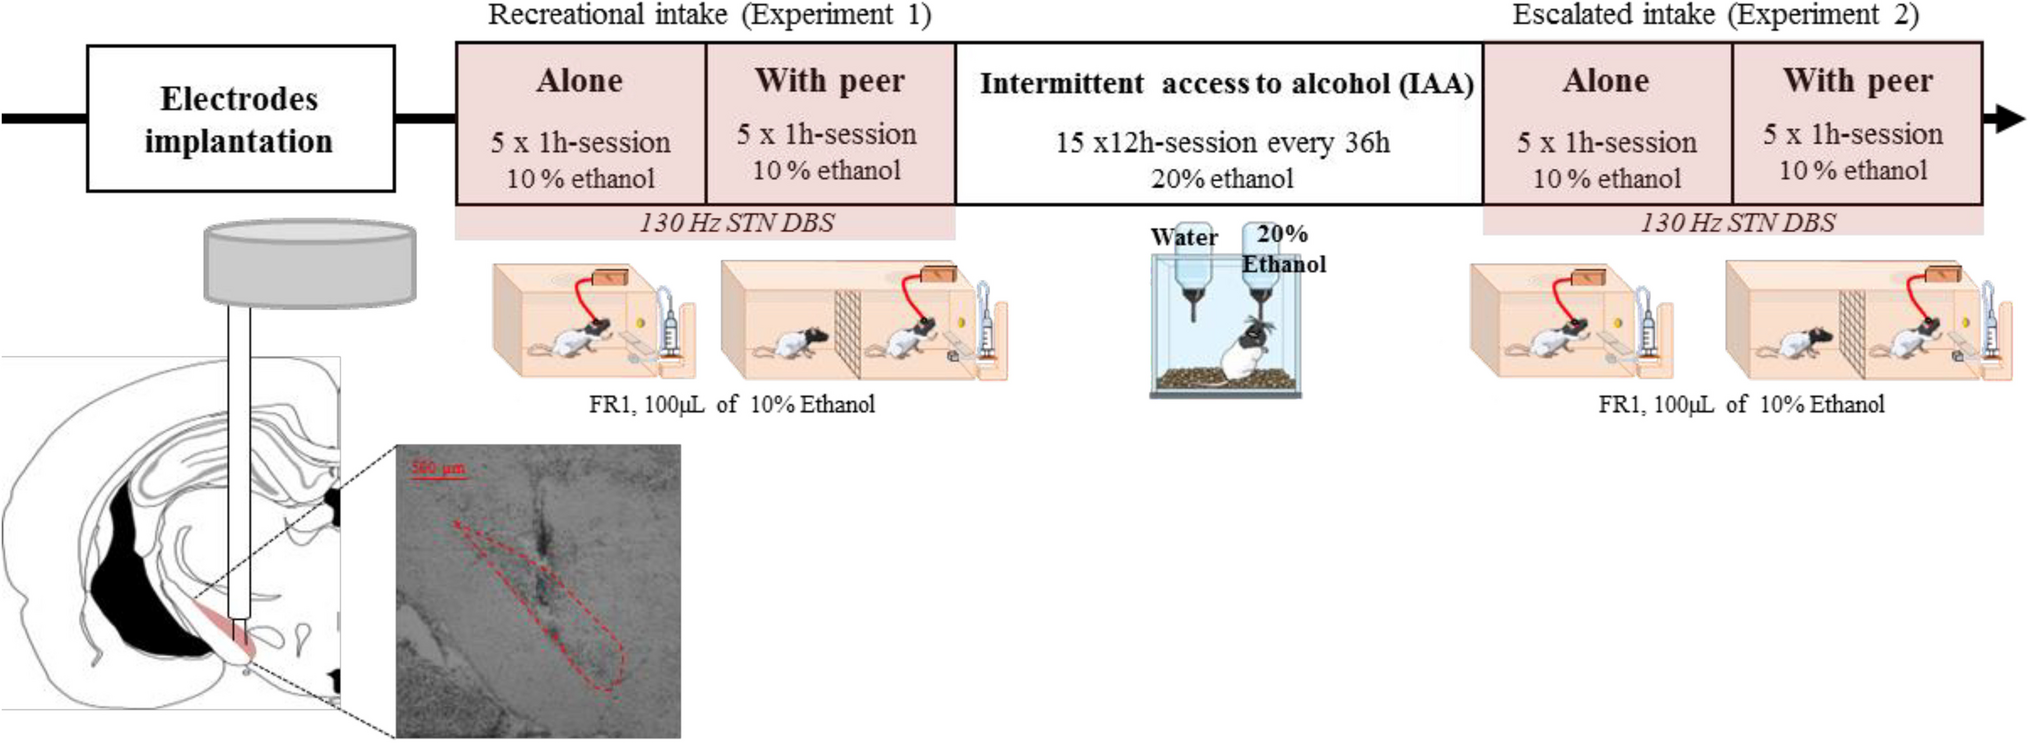 Subthalamic high-frequency deep brain stimulation reduces addiction-like alcohol use and the possible negative influence of a peer presence